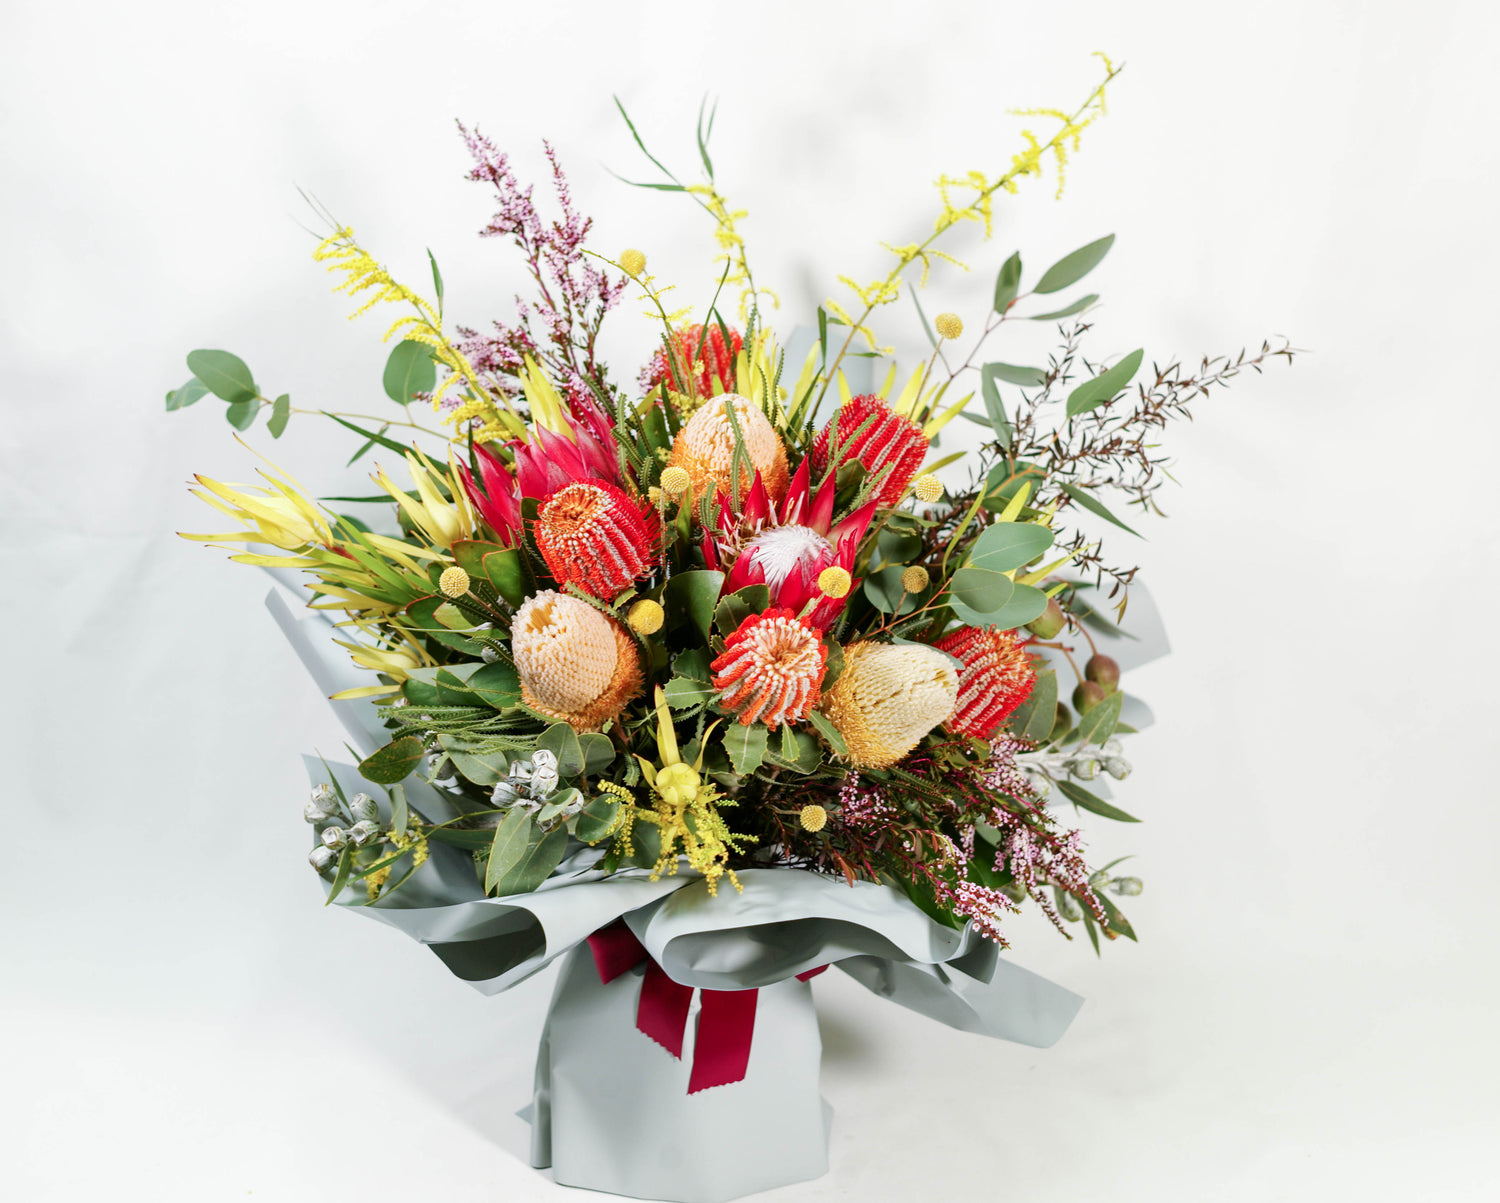 Complementary flowers and foliage arranged with our finest Australian and South African native flowers